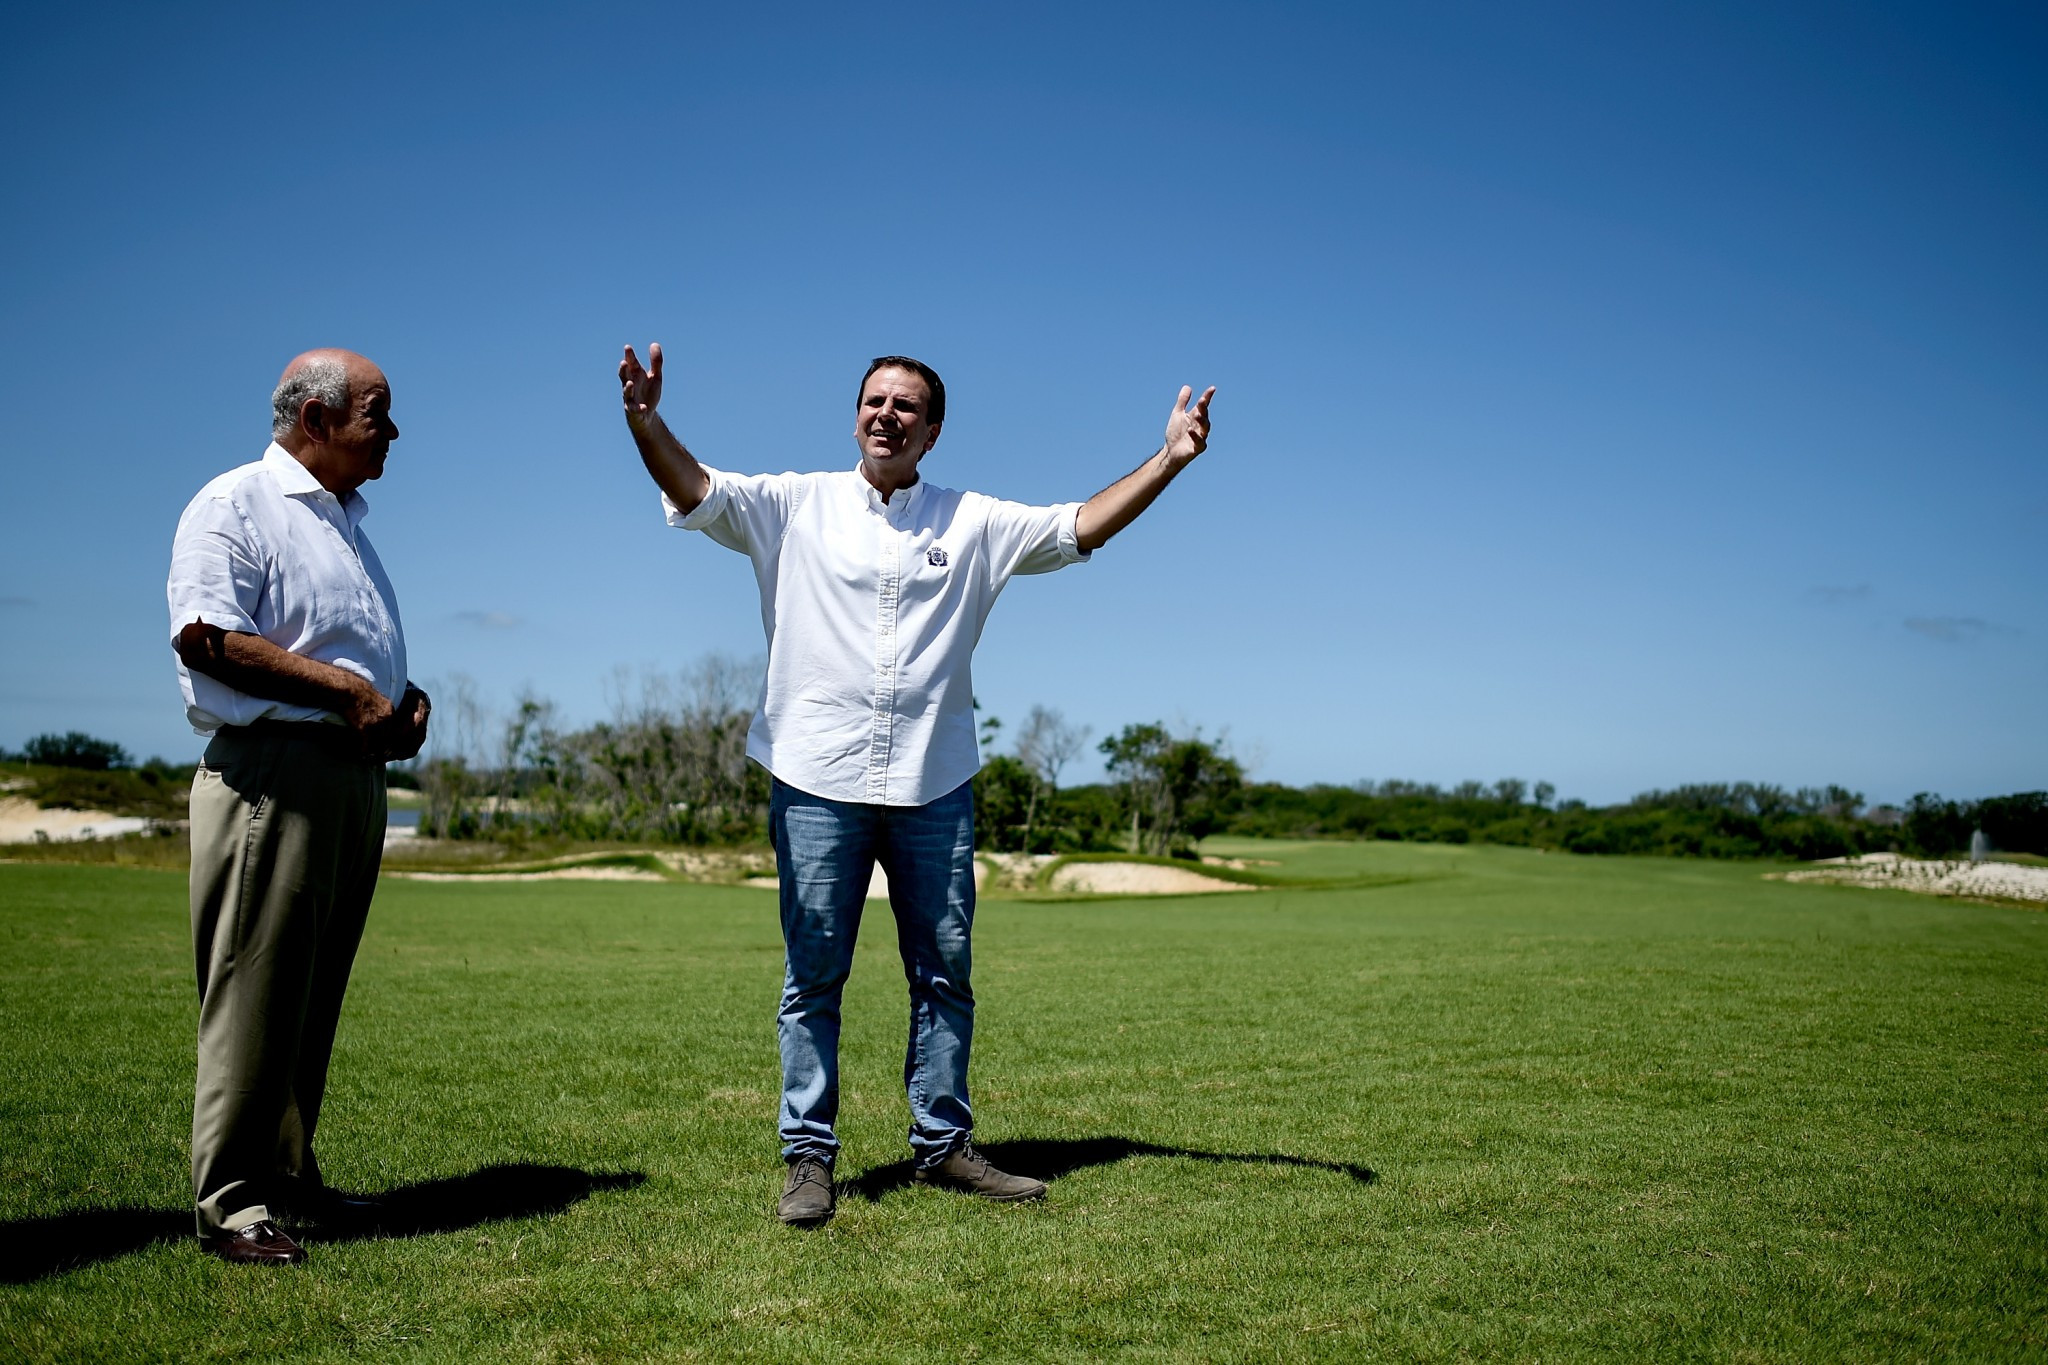 Former Rio Mayor facing corruption charges over Olympic golf course 